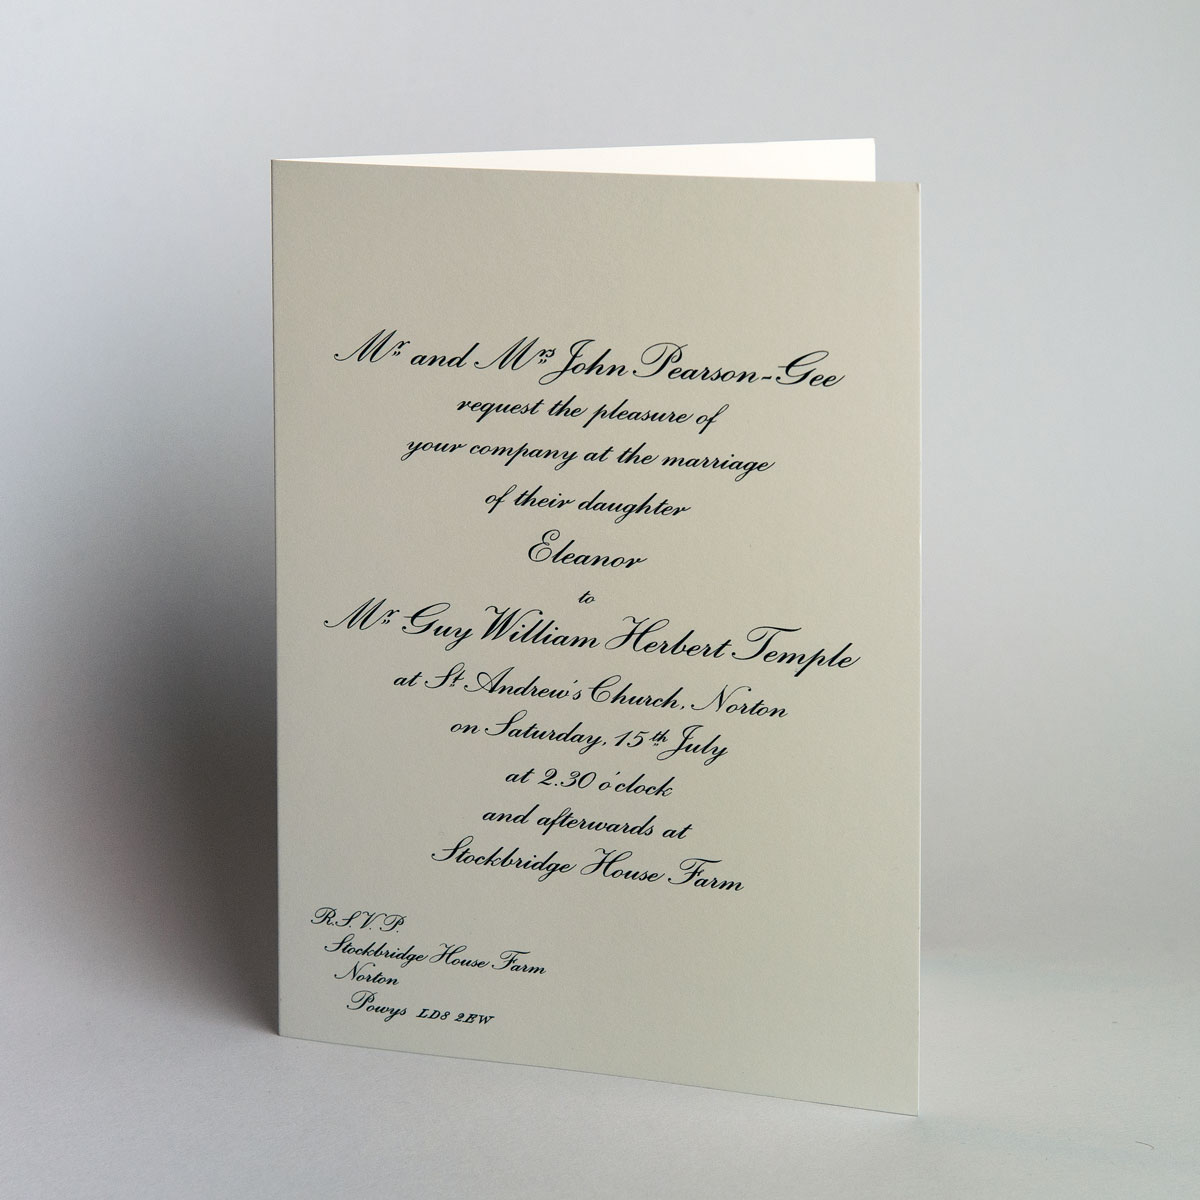 Wilberforce Traditional Wedding Invitations - Shop ...